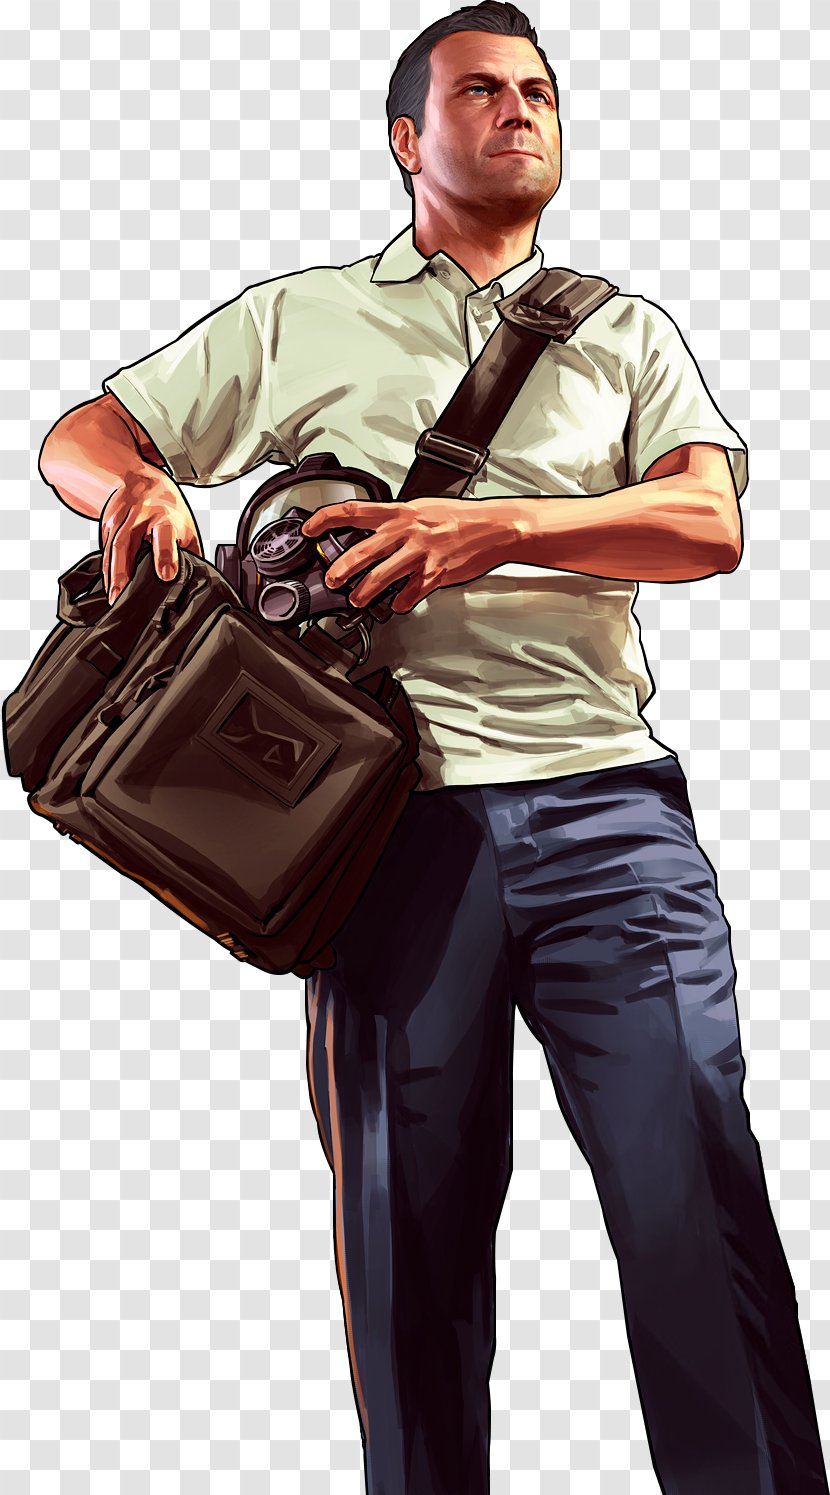 Grand Theft Auto V Auto: San Andreas Online IV - Playstation 3 - Jerrycan Transparent PNG